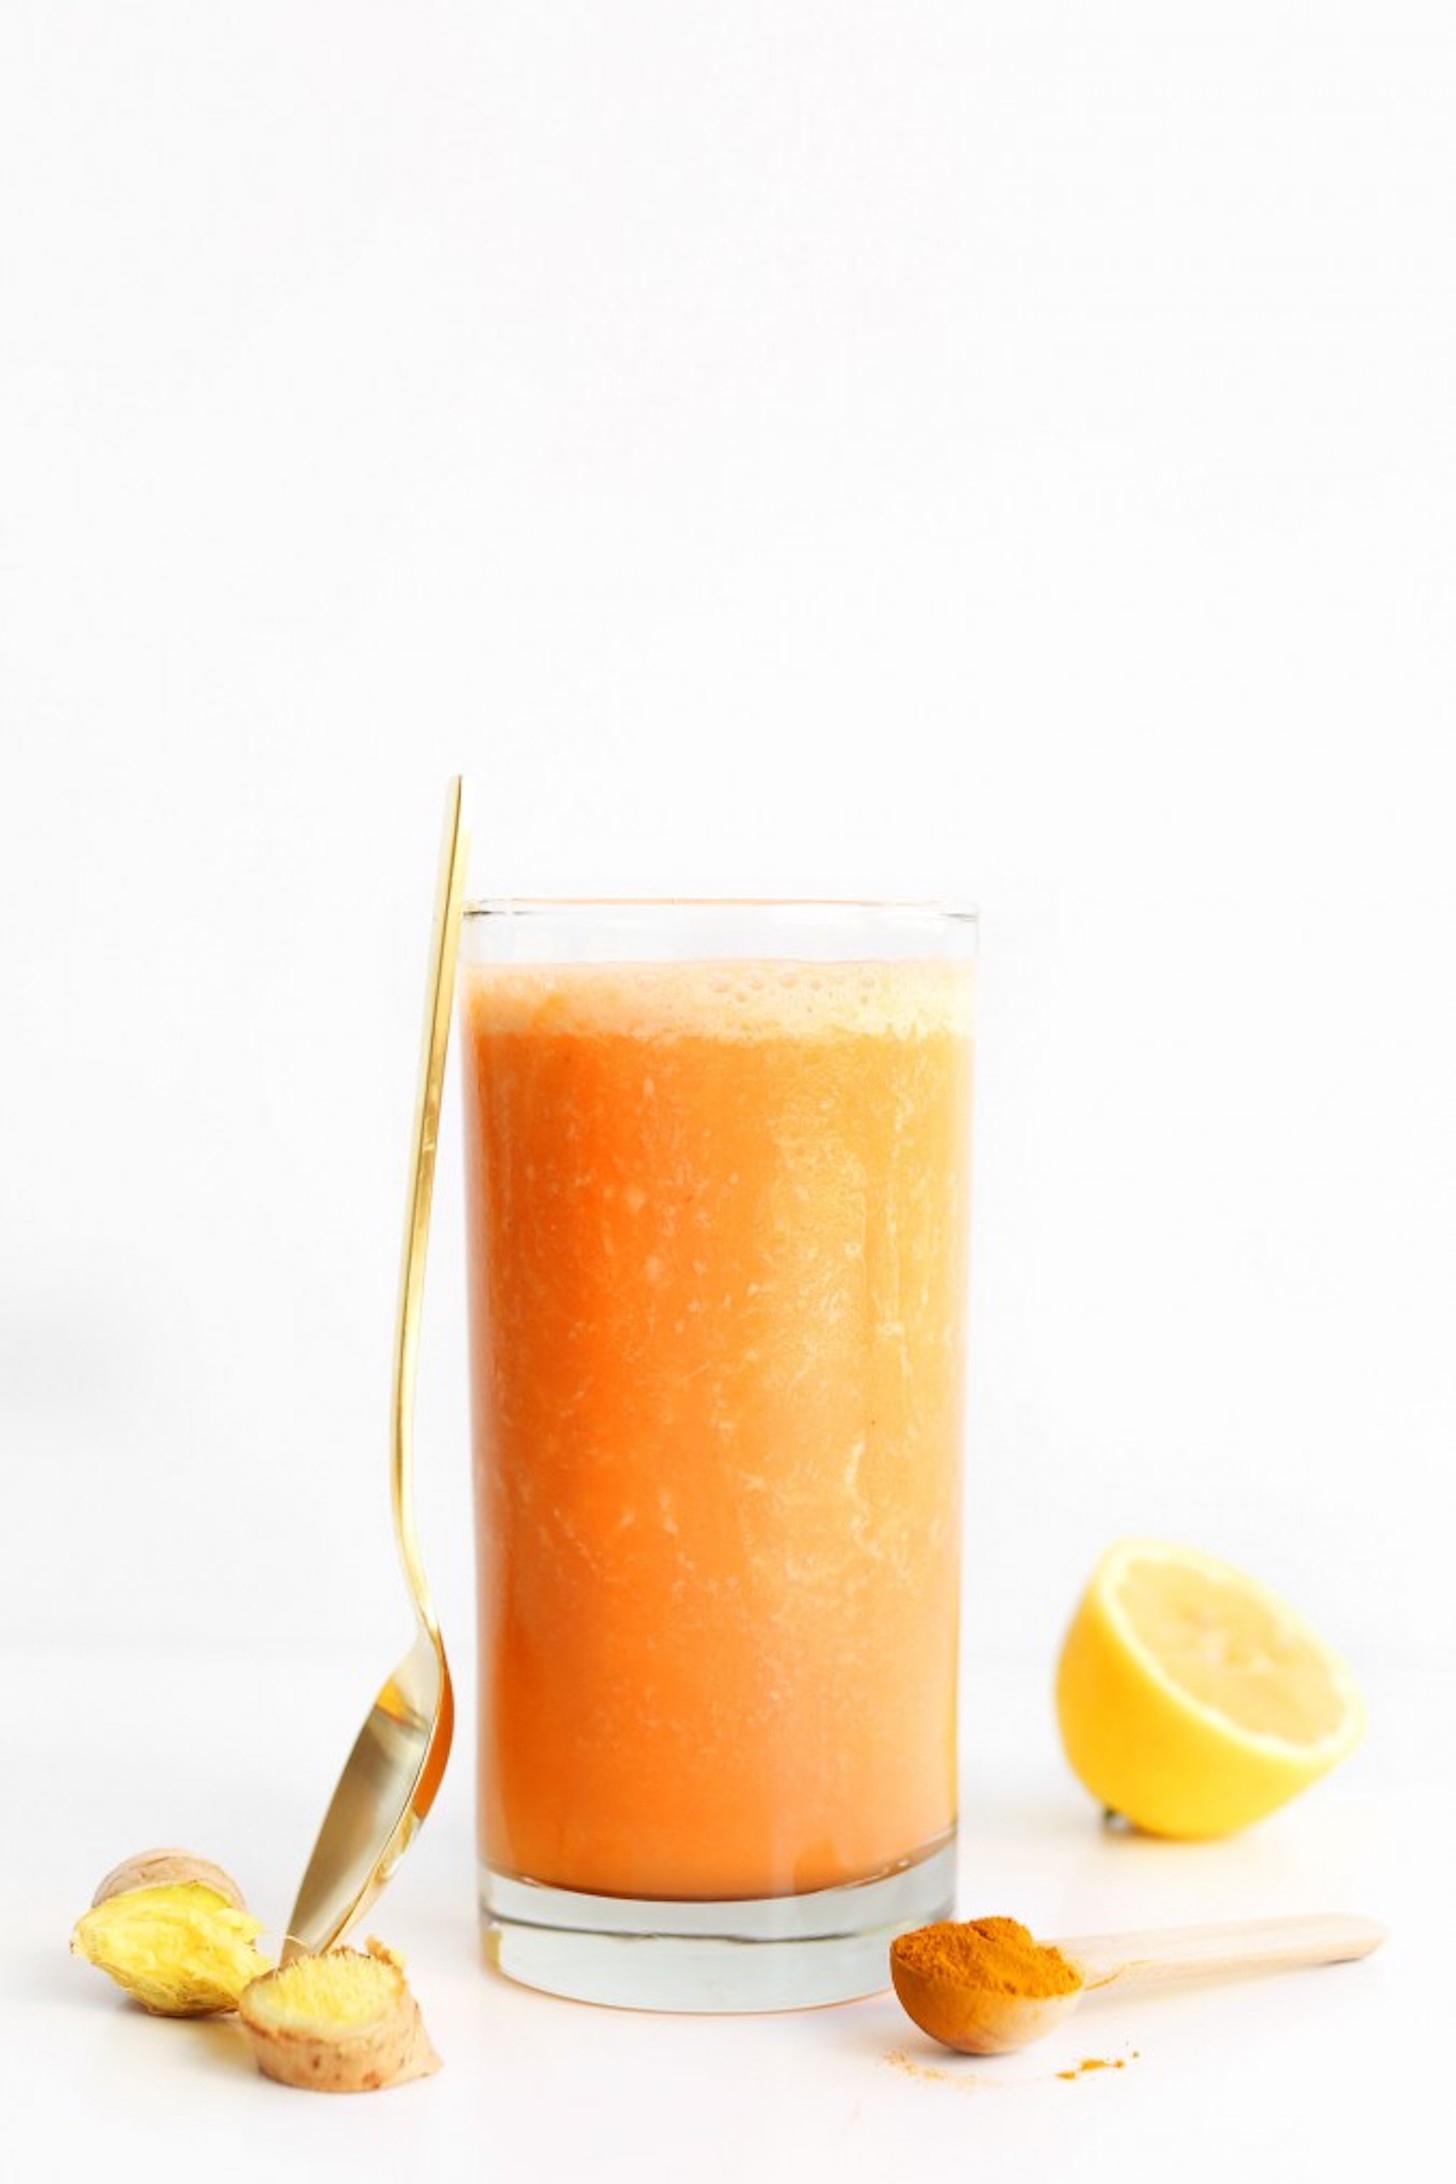 https://minimalistbaker.com/wp-content/uploads/2015/06/AMAZING-7-ingredient-Carrot-Ginger-Turmeric-Smoothie-Immune-boosting-anti-inflammatory-and-DELICIOUS-vegan-glutenfree-recipe-healthy-smoothie-676x1024-1.jpg